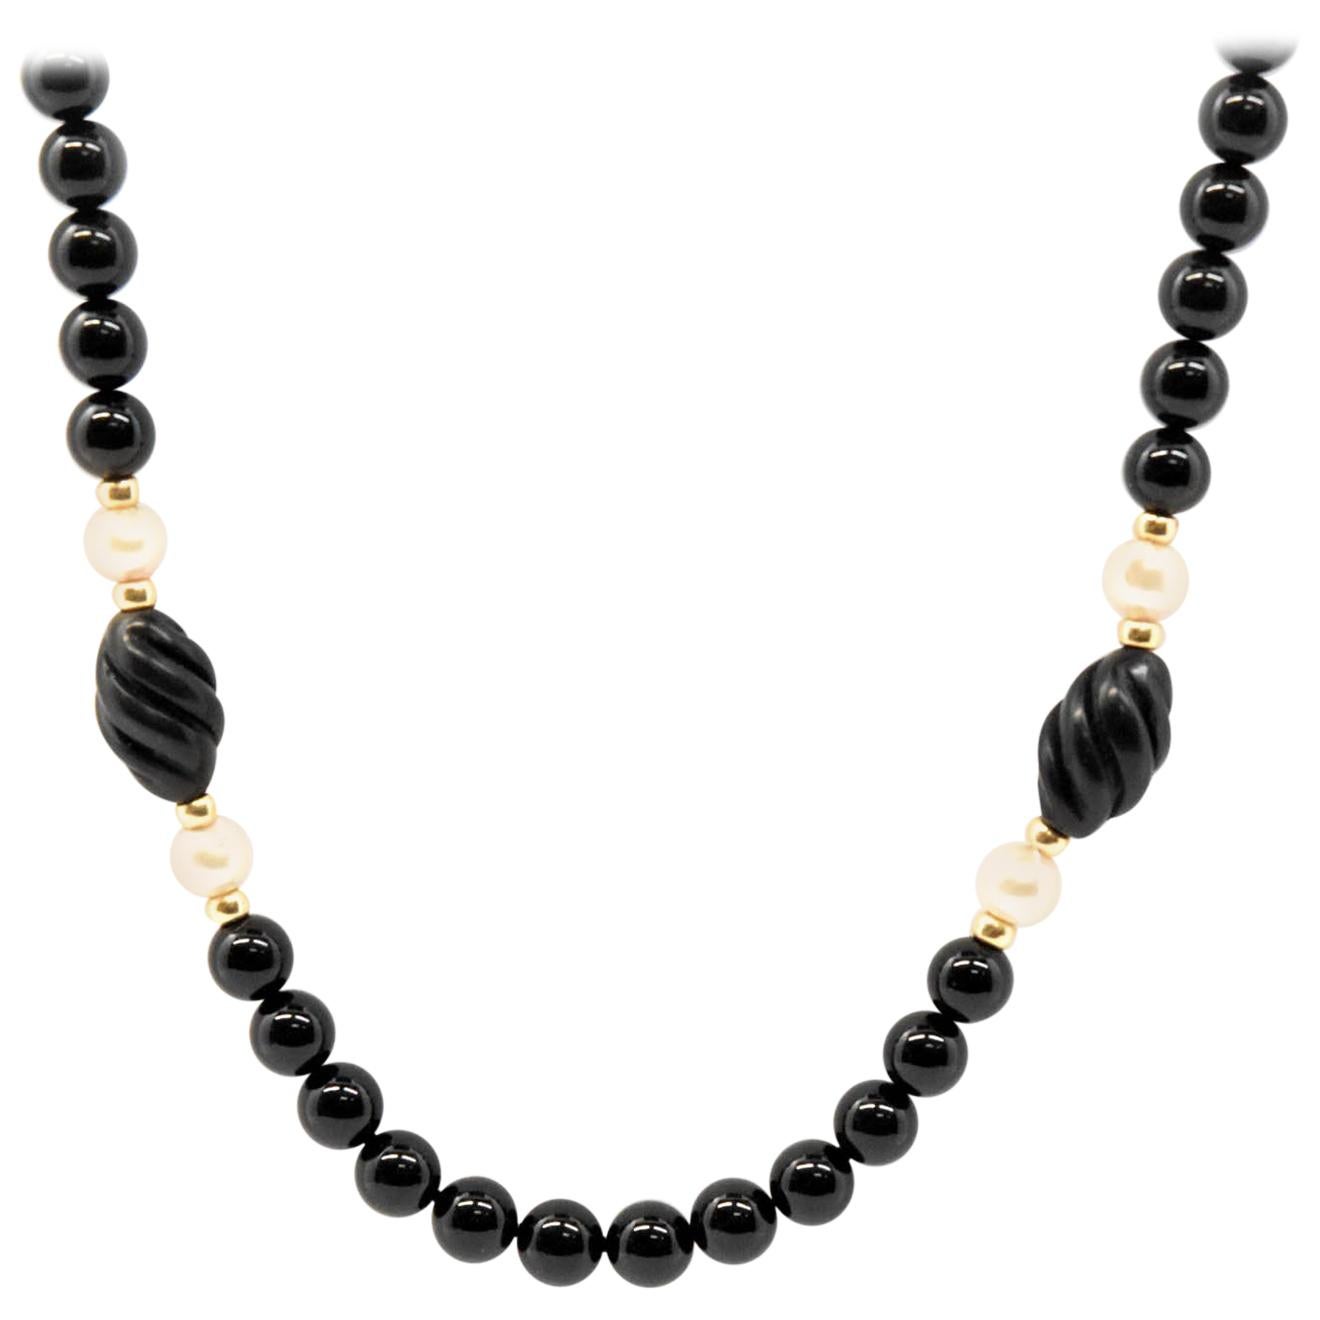 Strand of Black Onyx Beads with 14 Karat Yellow Gold and Pearl Accent Beads